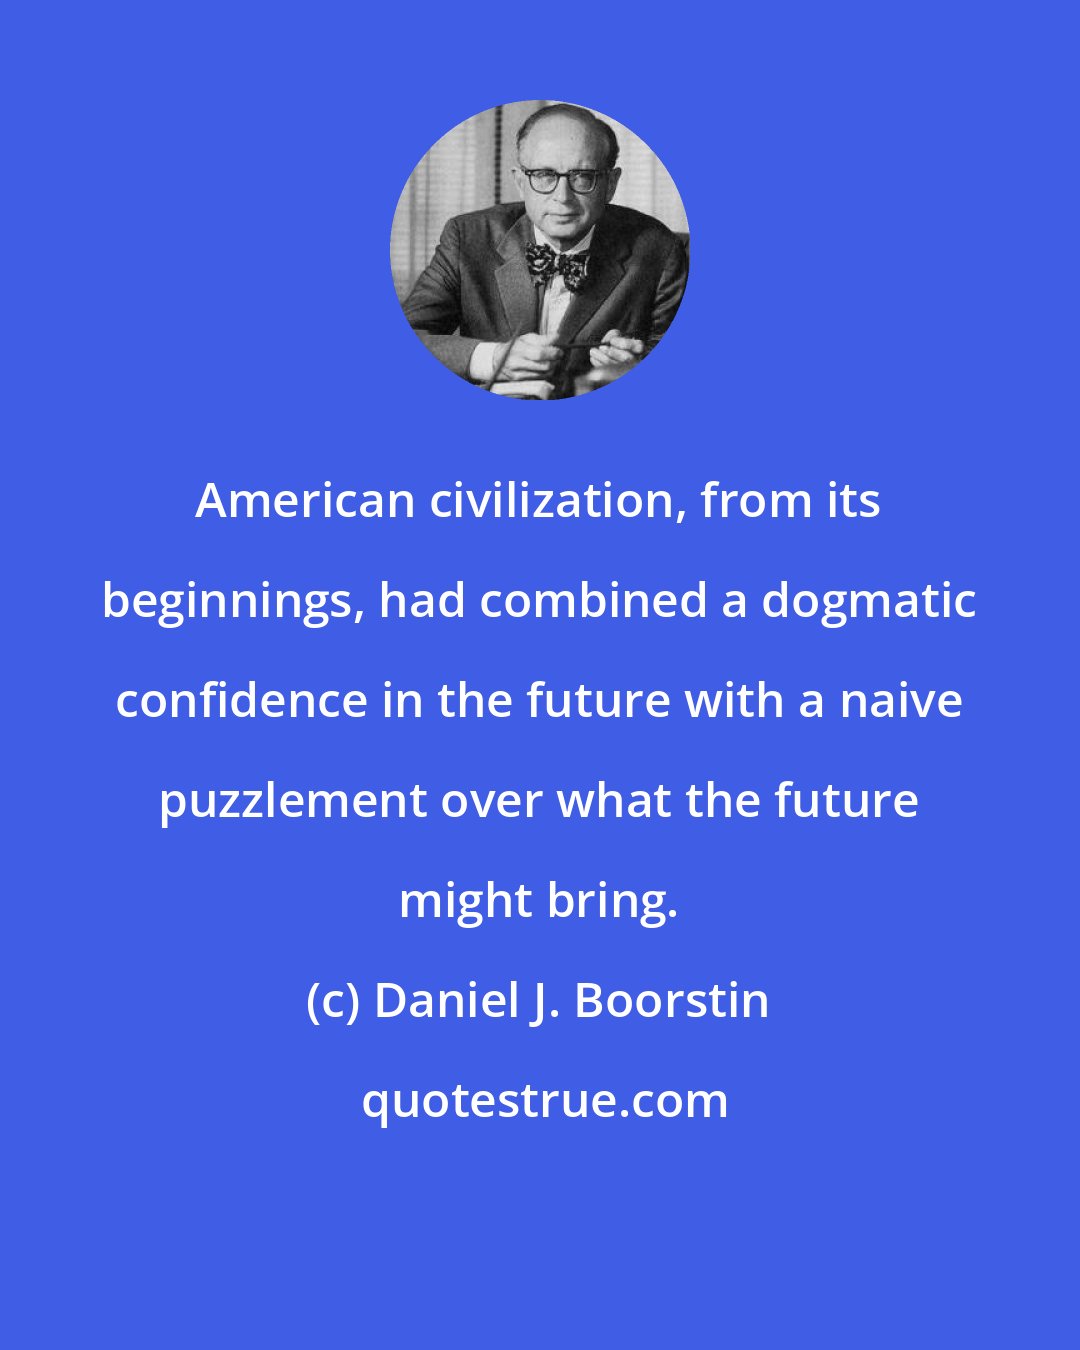 Daniel J. Boorstin: American civilization, from its beginnings, had combined a dogmatic confidence in the future with a naive puzzlement over what the future might bring.